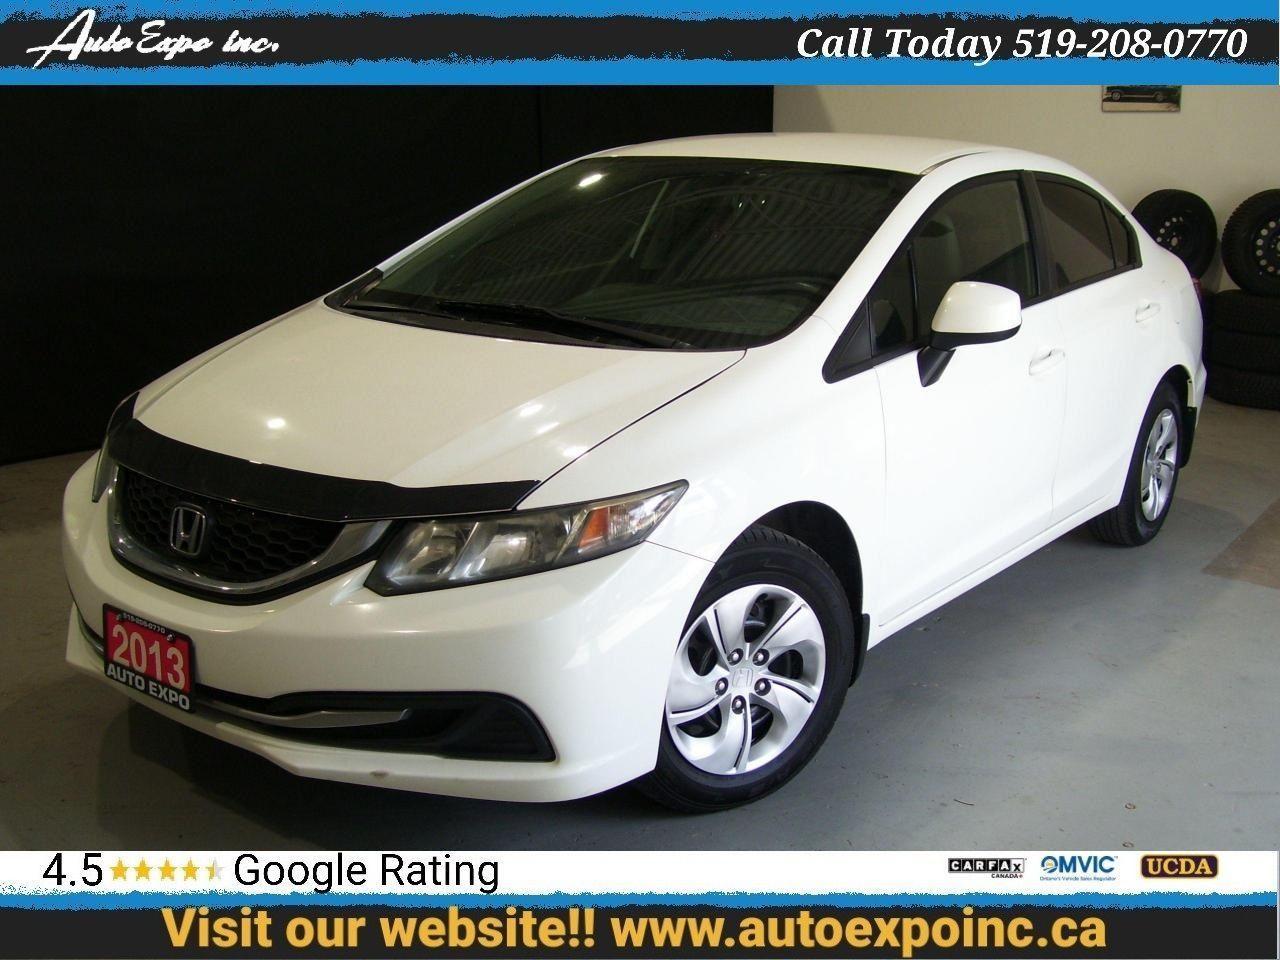 2013 Honda Civic LX,CERTIFIED,BLUETOOTH,TINTED,5 SPEED,CLEAN CARFAX - Photo #1